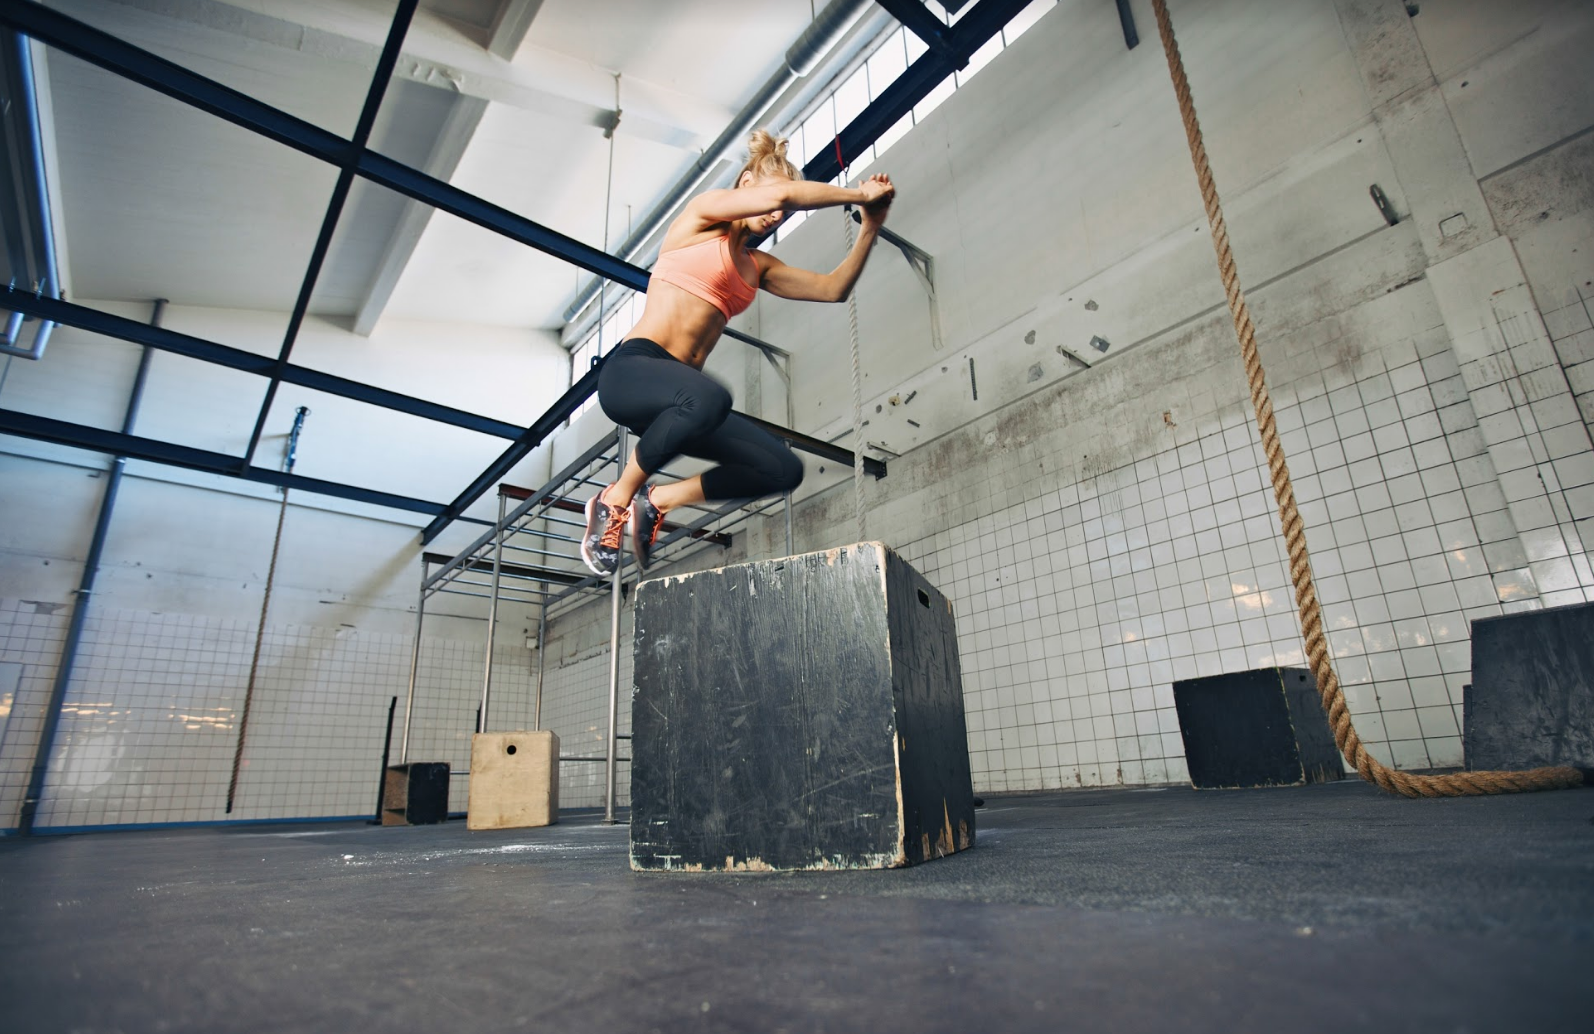 CrossFitters CAN jump.